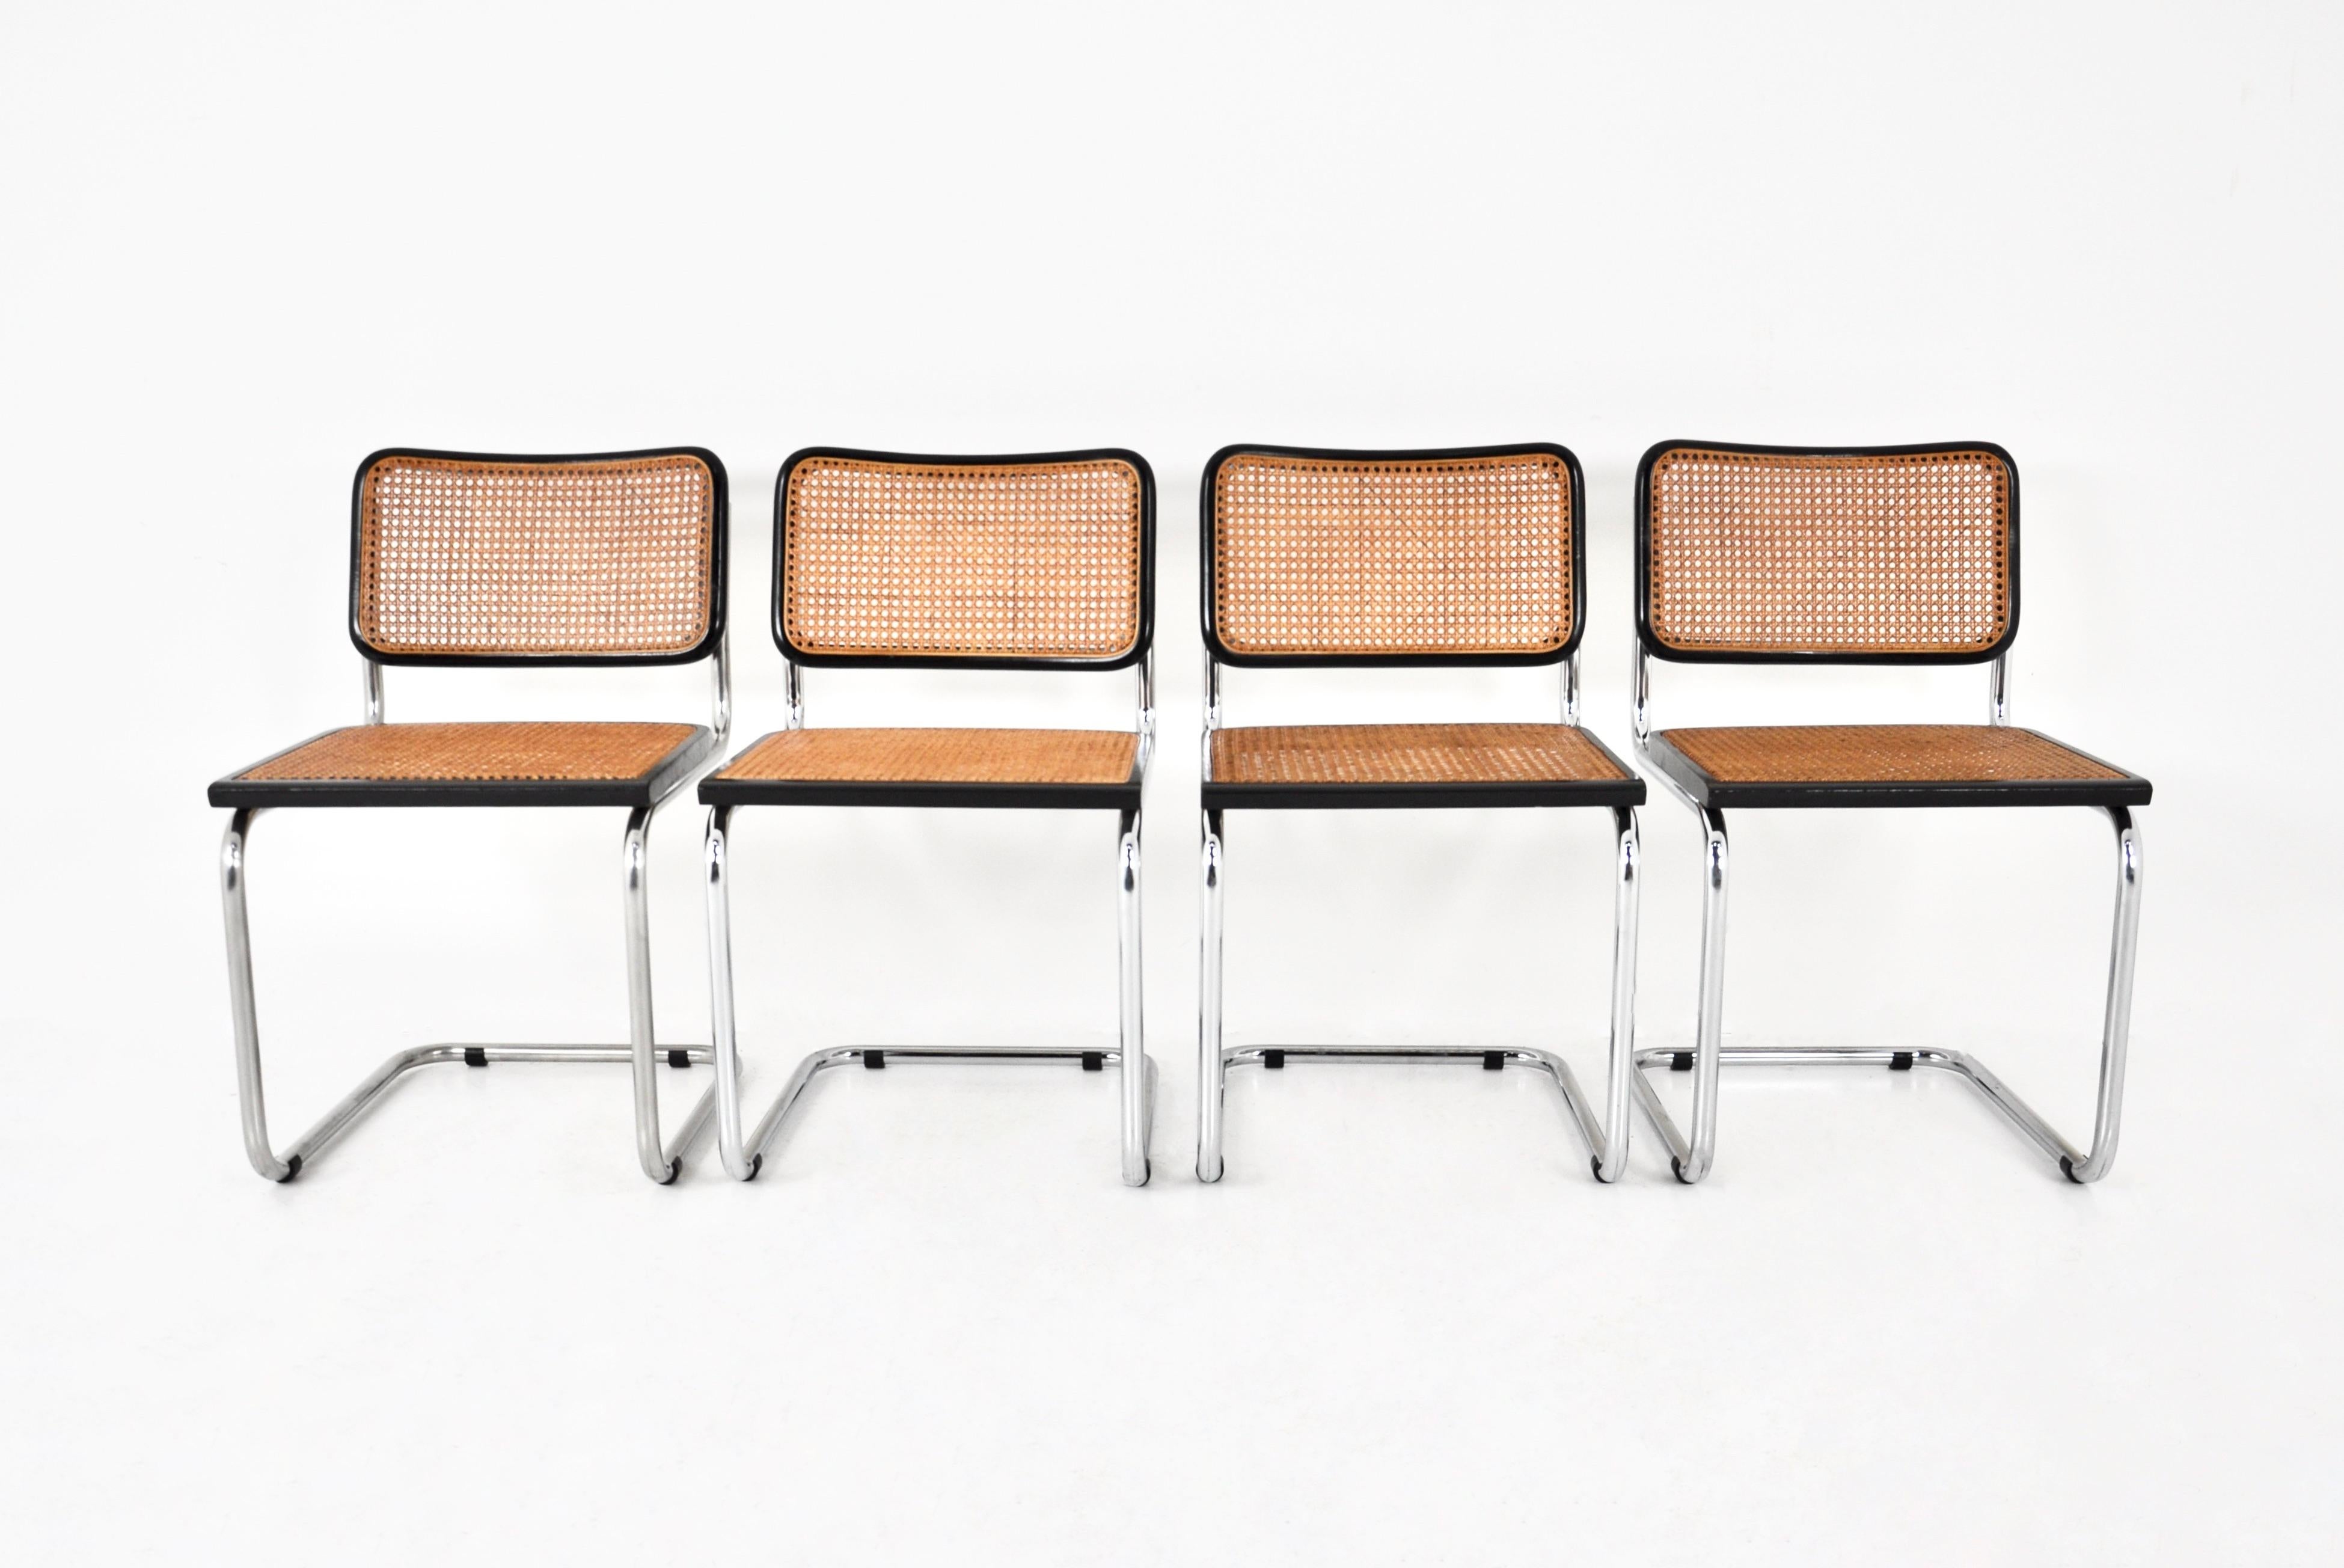 Set of 4 chairs in wood, rattan and metal. Dimensions: seat height: 46 cm. Wear due to time and age of the chairs.